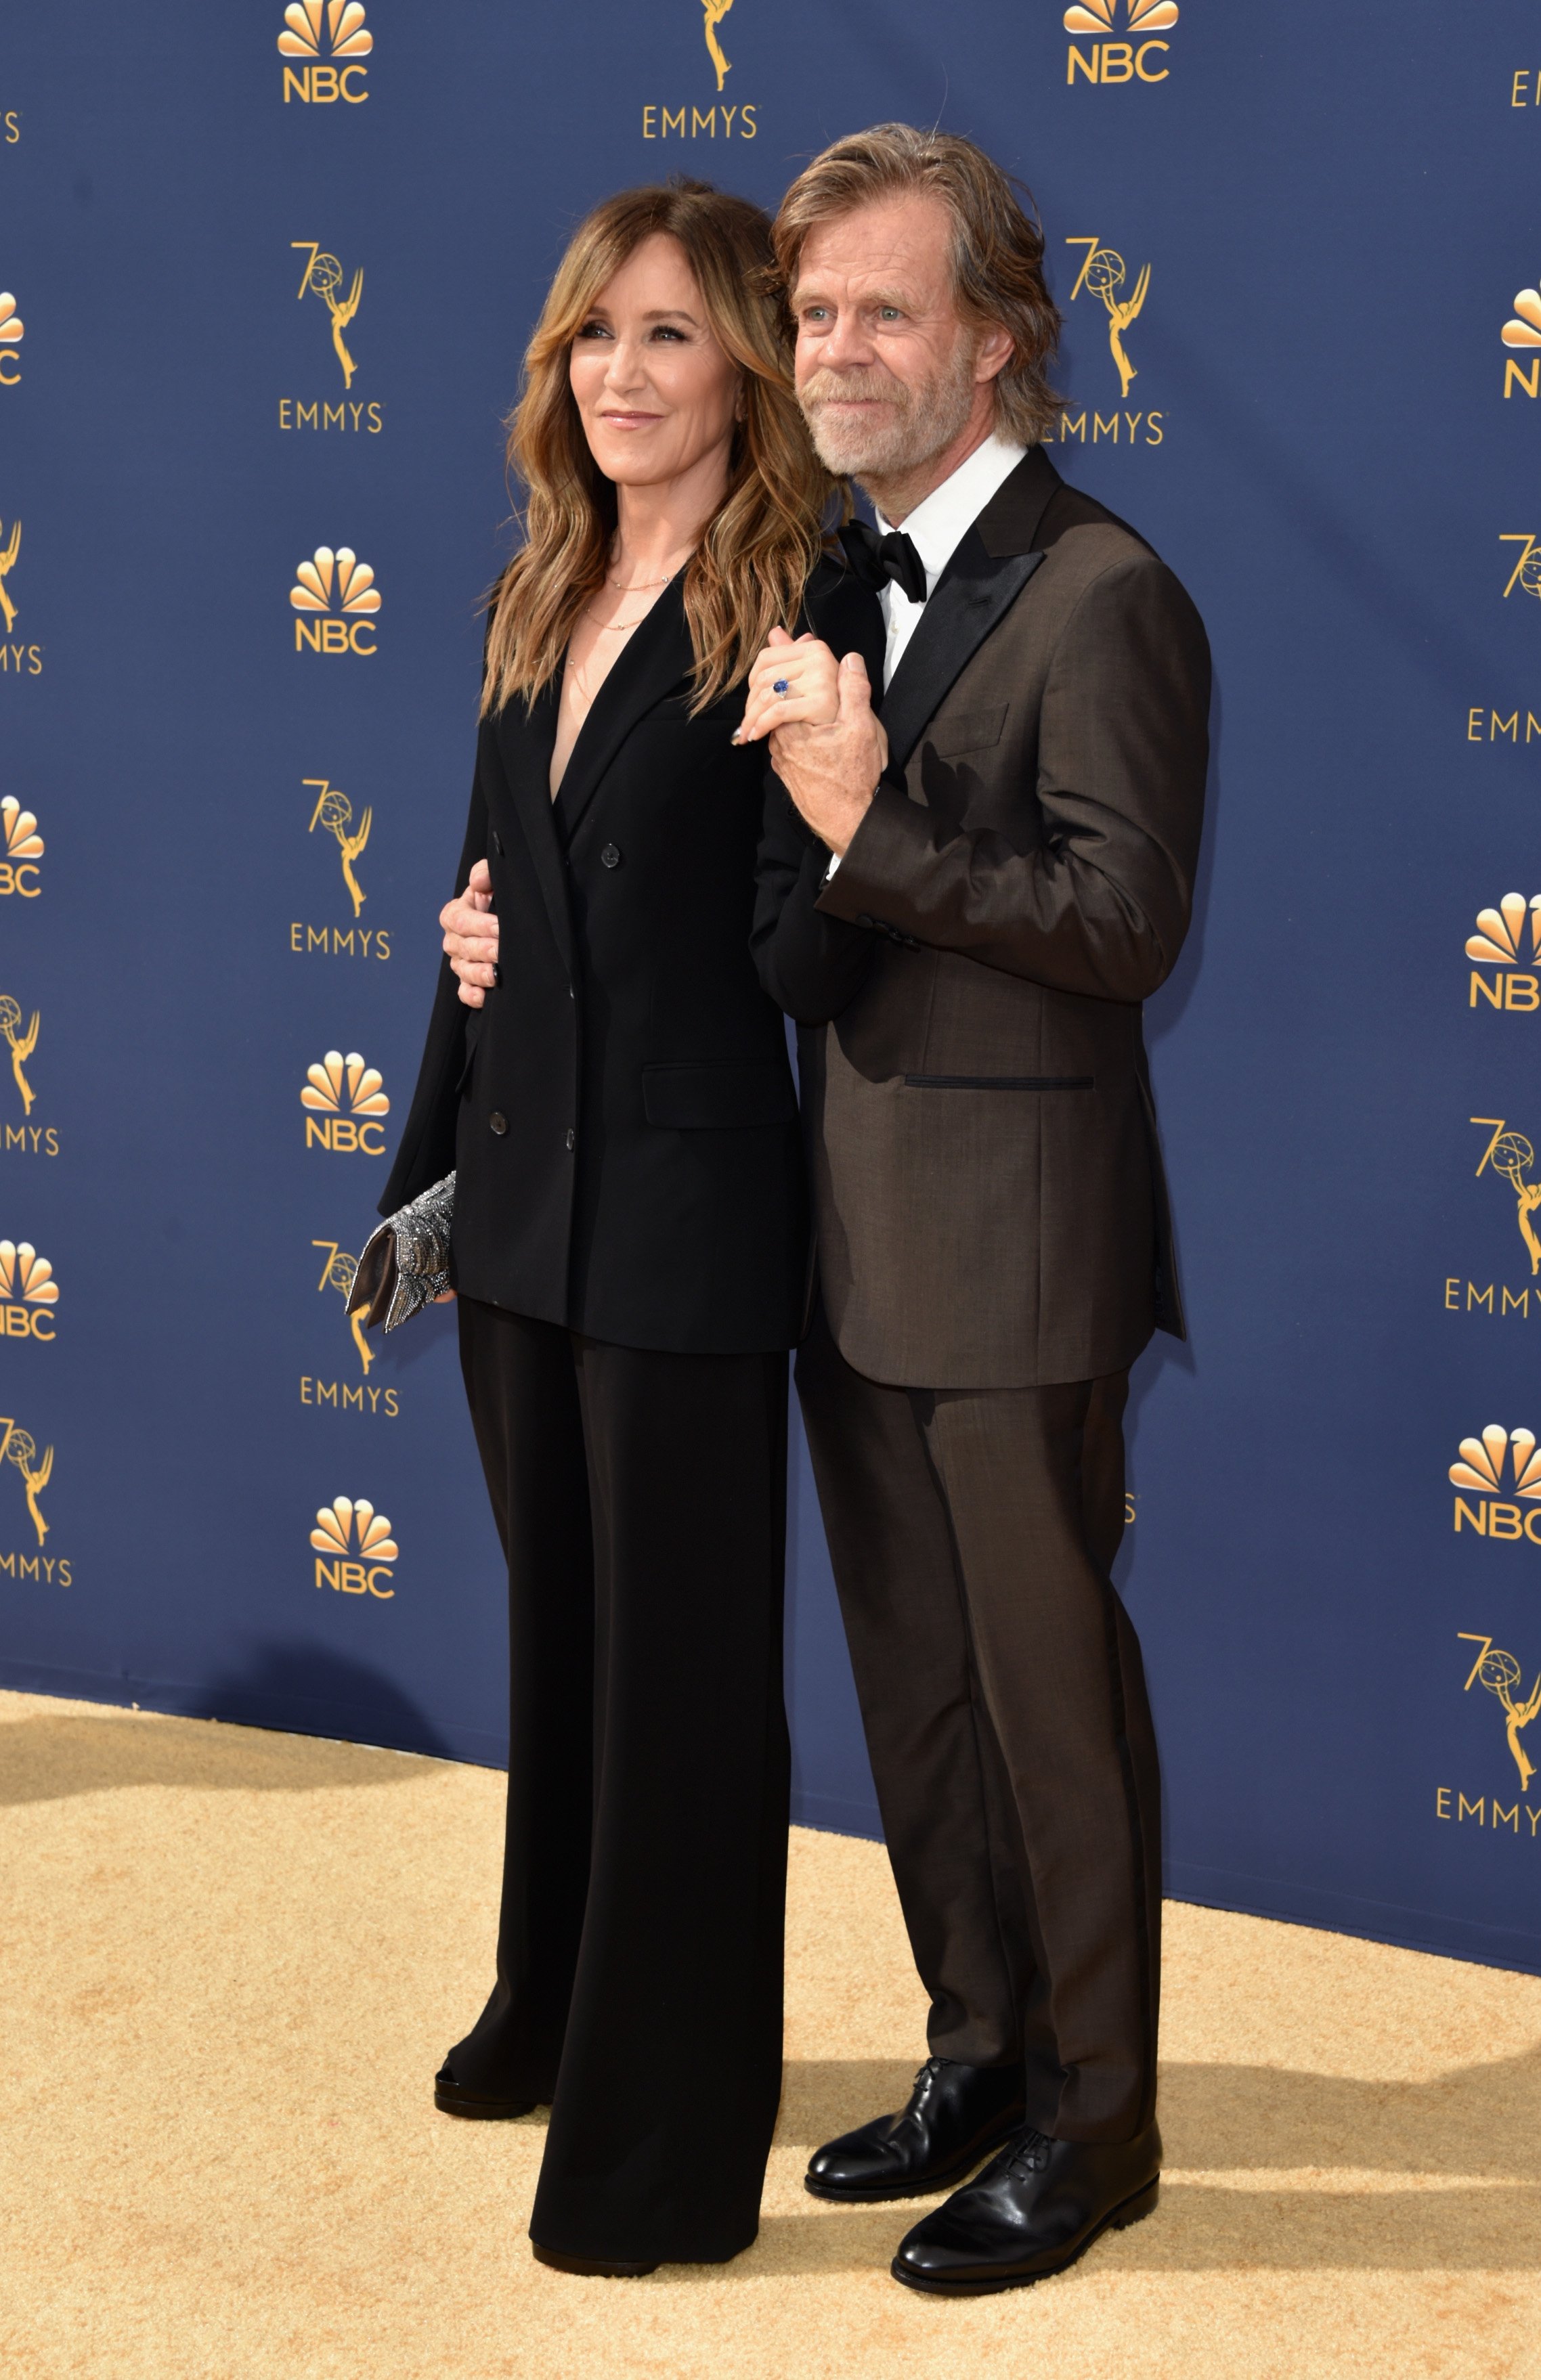 Felicity Huffman and William H Macy attend the 70th Emmy Awards in Los Angeles on September 17, 2018 | Photo: Getty Images